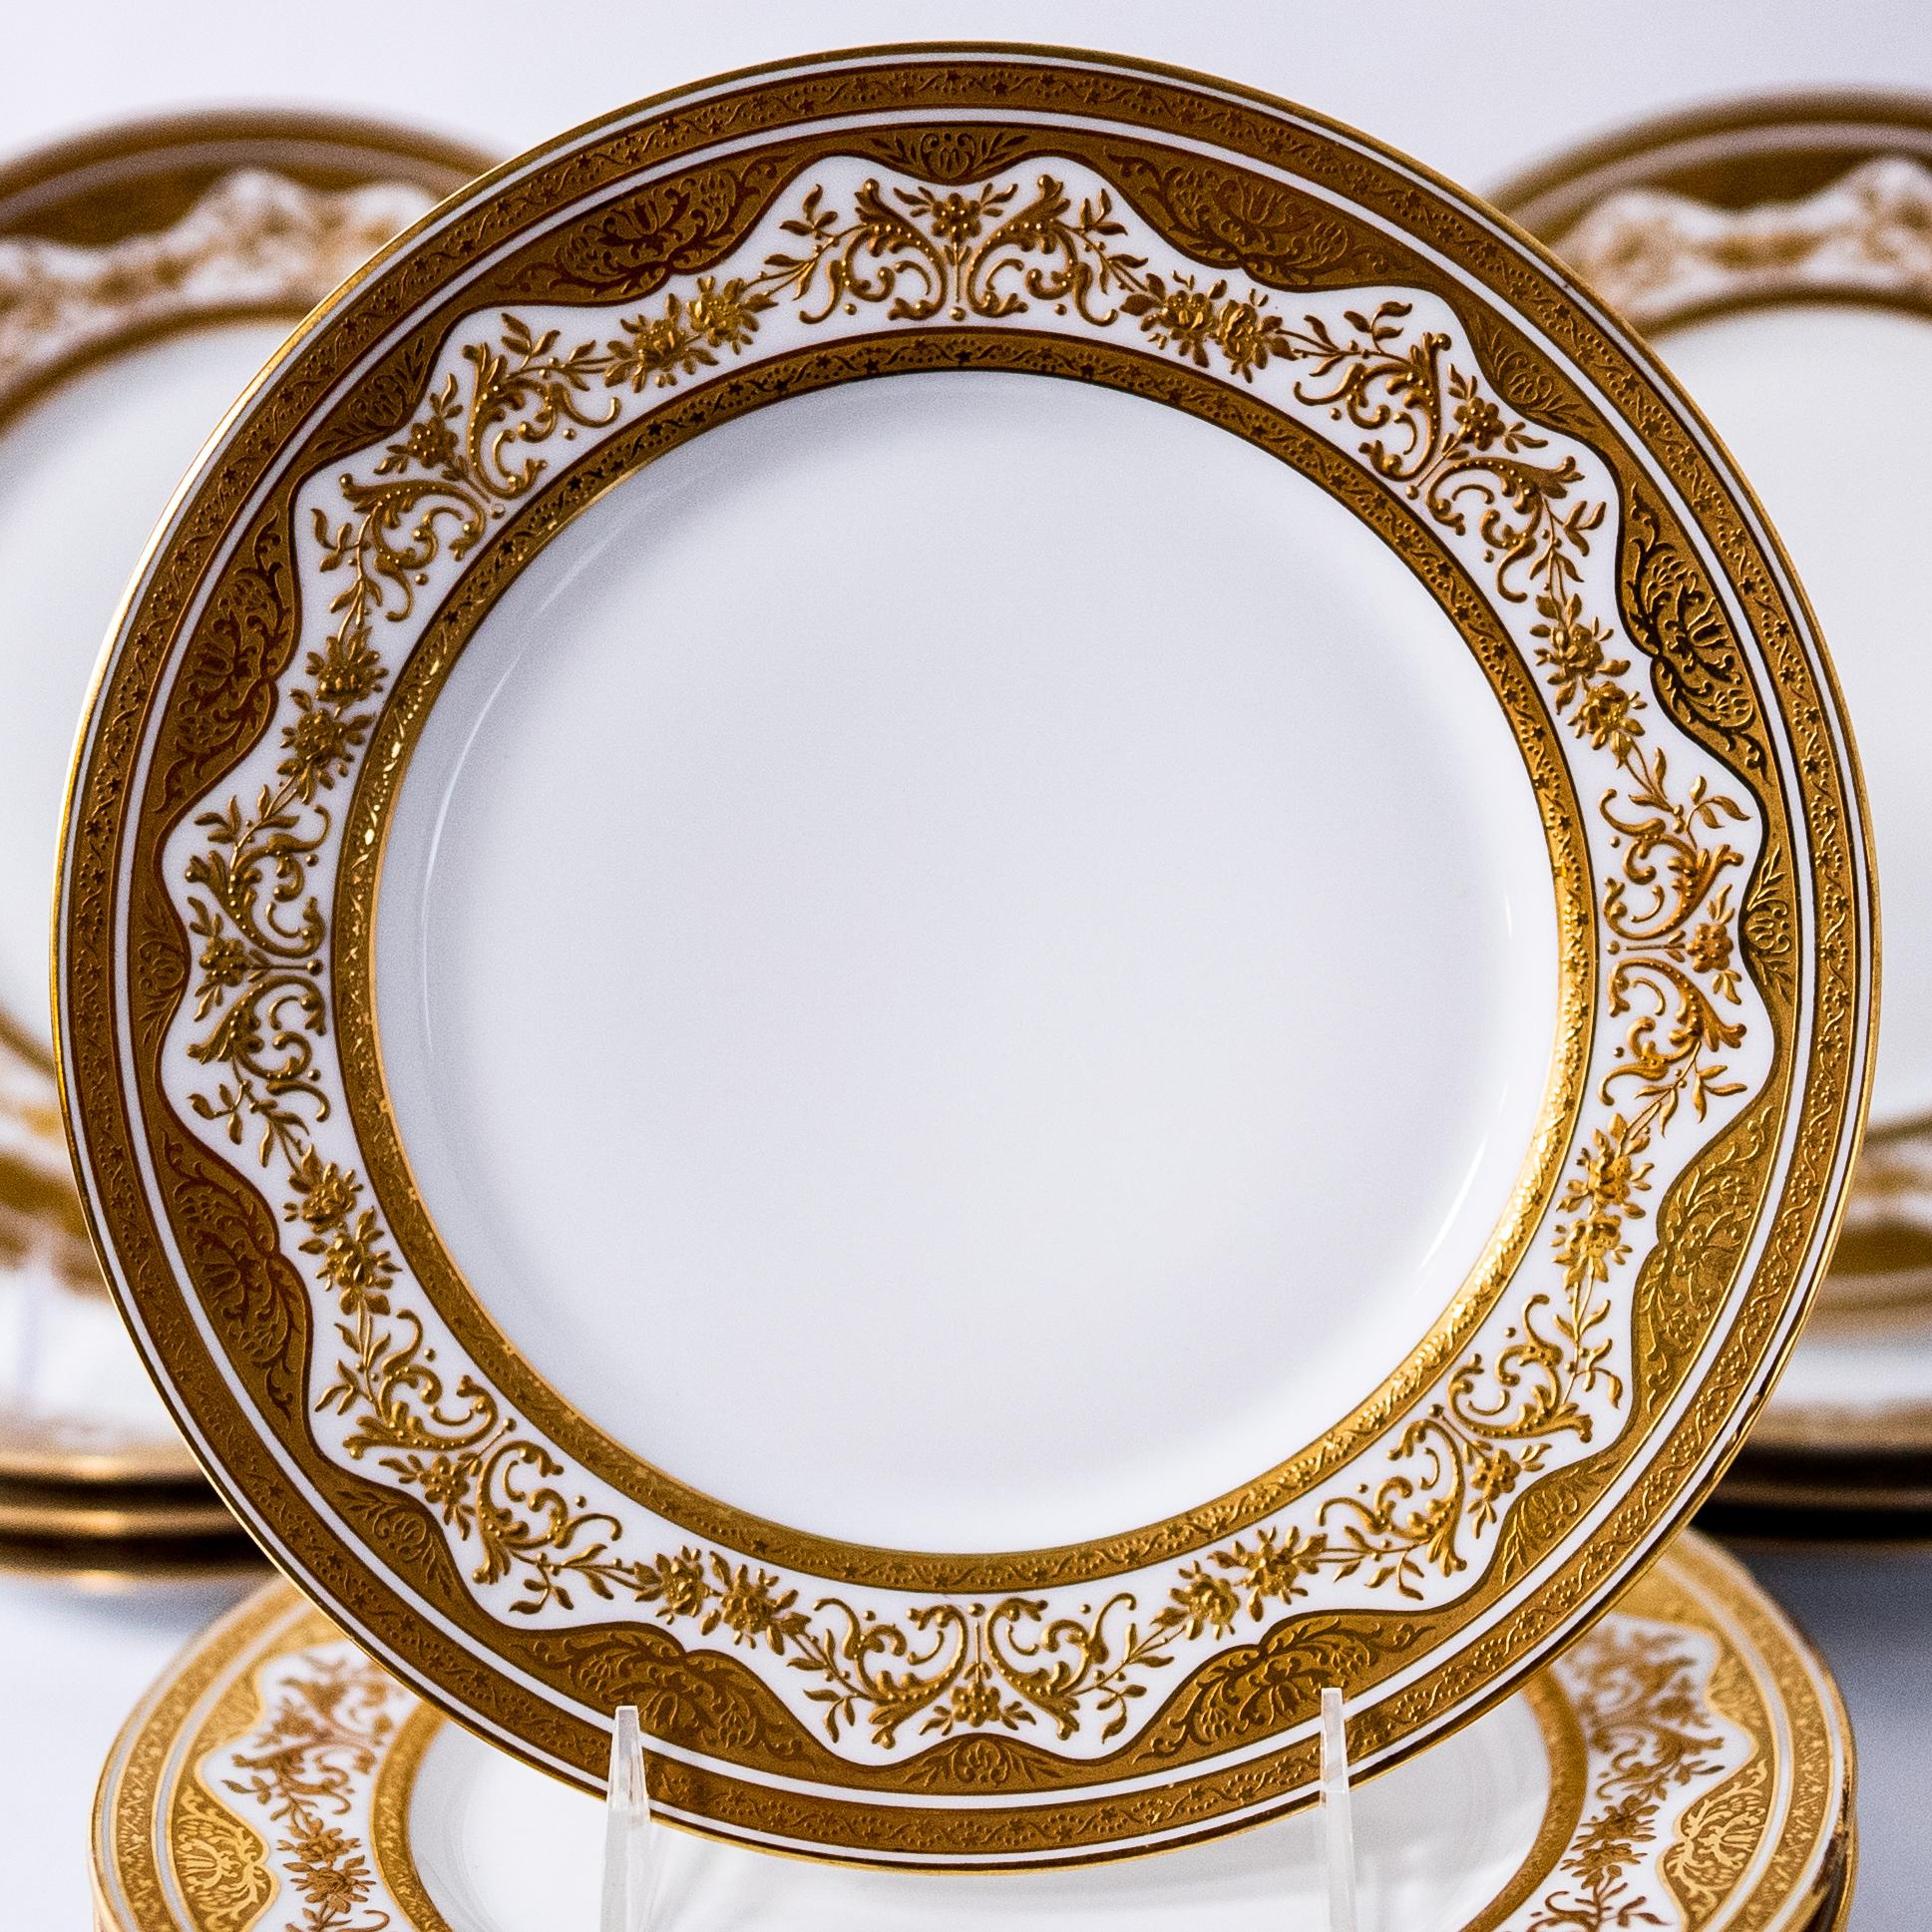 A great set of Continental sized dinner plates with an elaborately decorated raised tooled gilded collar featuring shaped and classic double acid etched 24 karat gold bands. Crisp white porcelain and a custom retailer hall mark: JE Caldwell